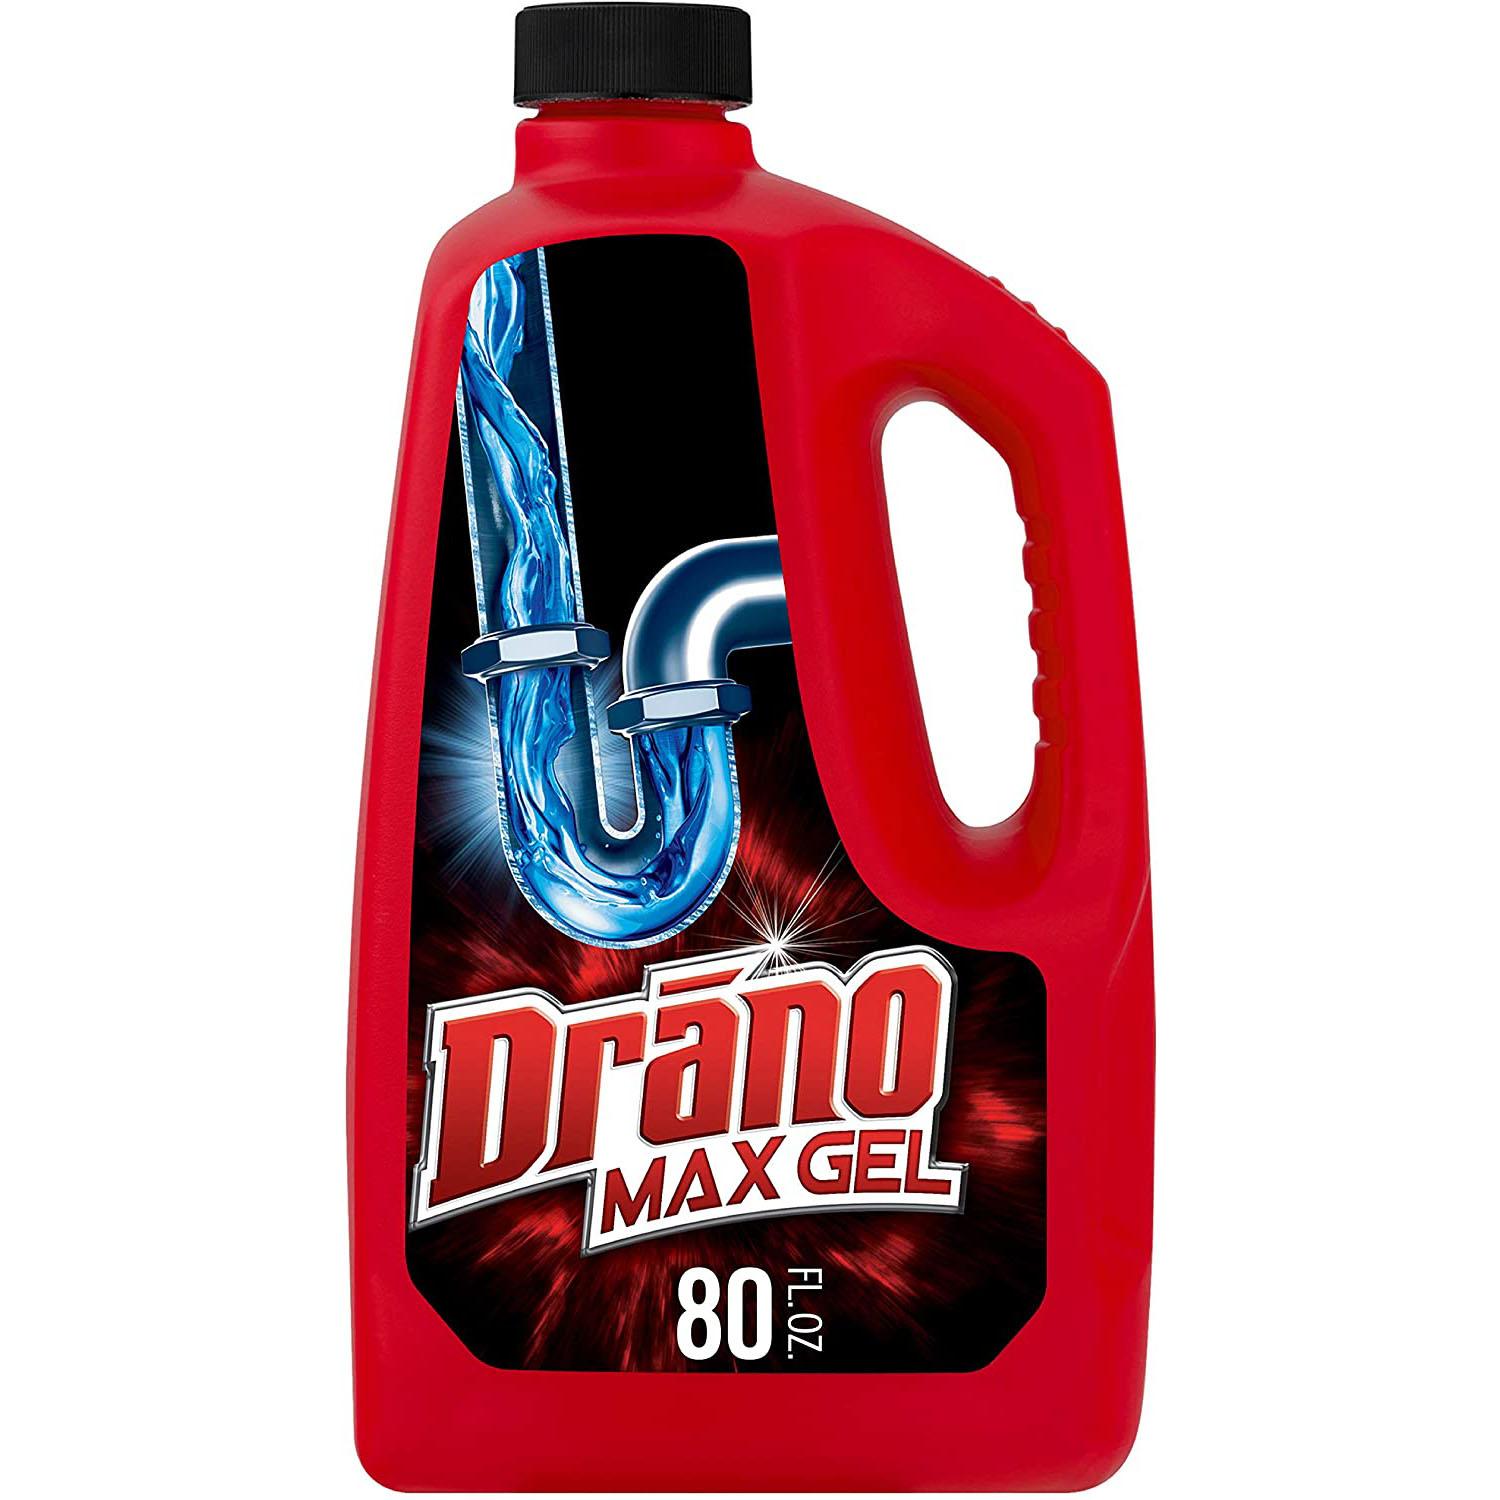 80oz Drano Max Gel Drain Clog Remover and Cleaner for $6.43